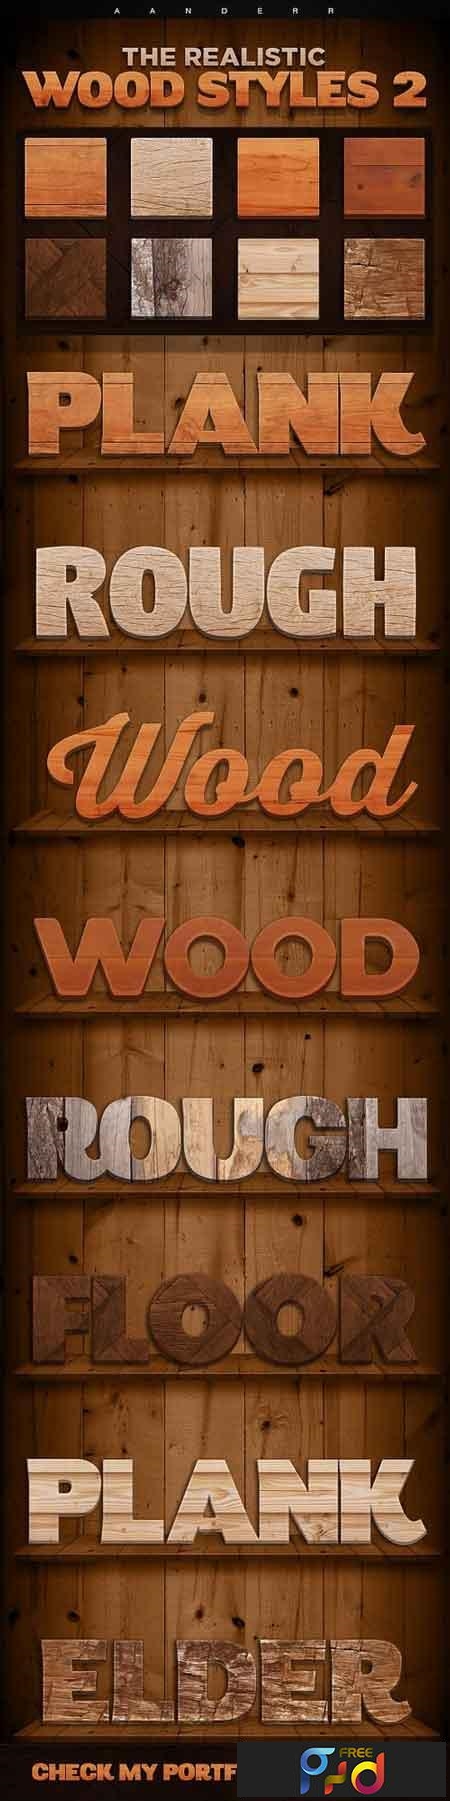 The Realistic Wood Styles 2 18006000 1